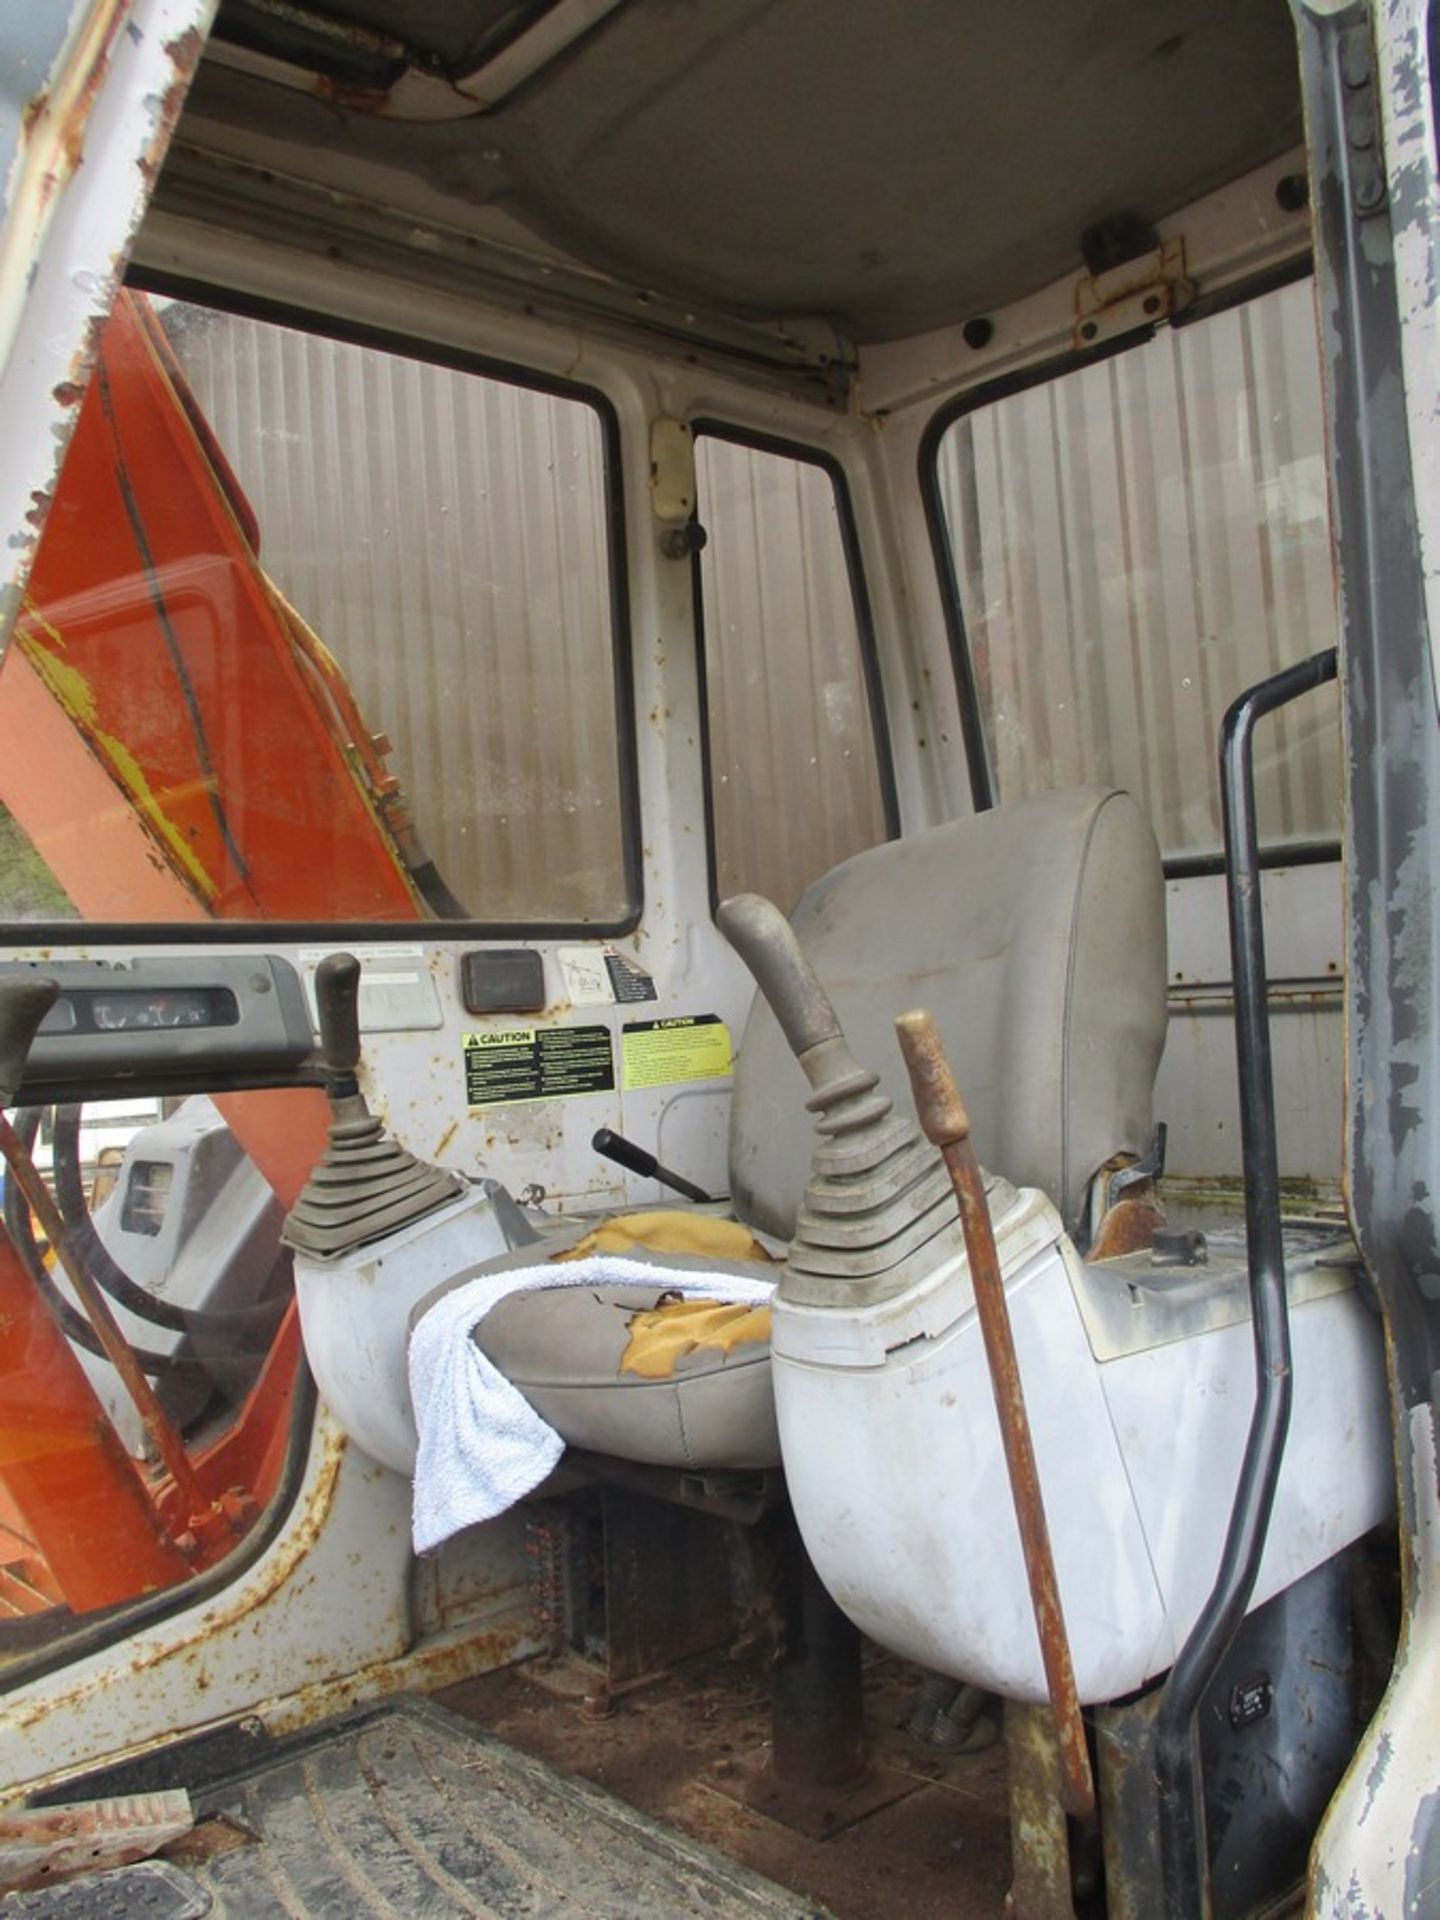 SUMITOMO 7 TON EXCAVATOR C.W 2 BUCKETS SHOWING 5635HRS - Image 9 of 11